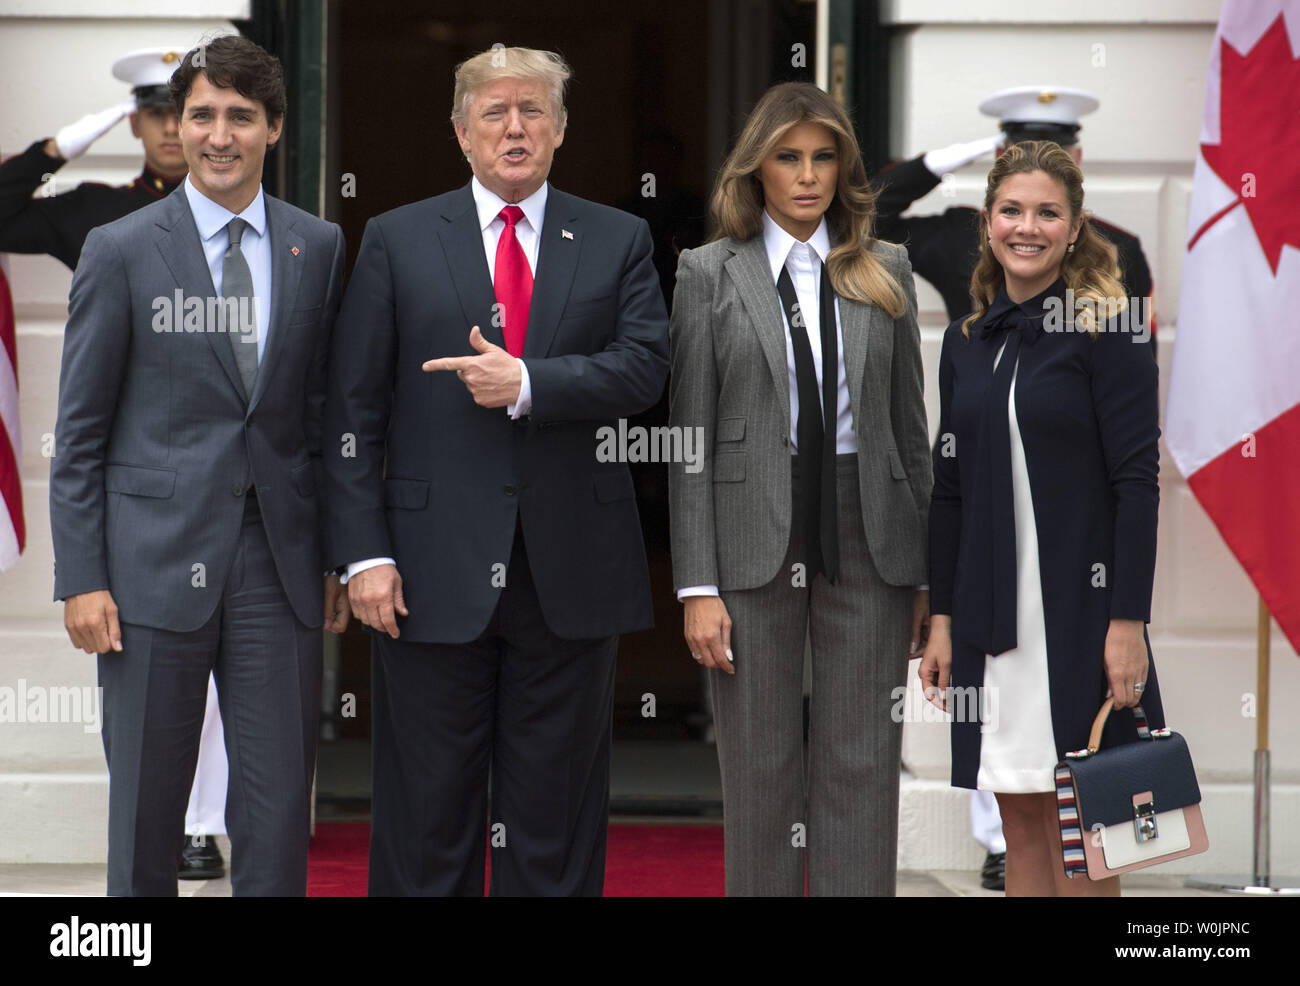 President Donald Trump (2nd-L) and First Lady Melania Trump (2nd-R) pose  with Canadian Prime Minister Justin Trudeau (L) and his wife Gregoire  Trudeau as they arrive at the White House in Washington,